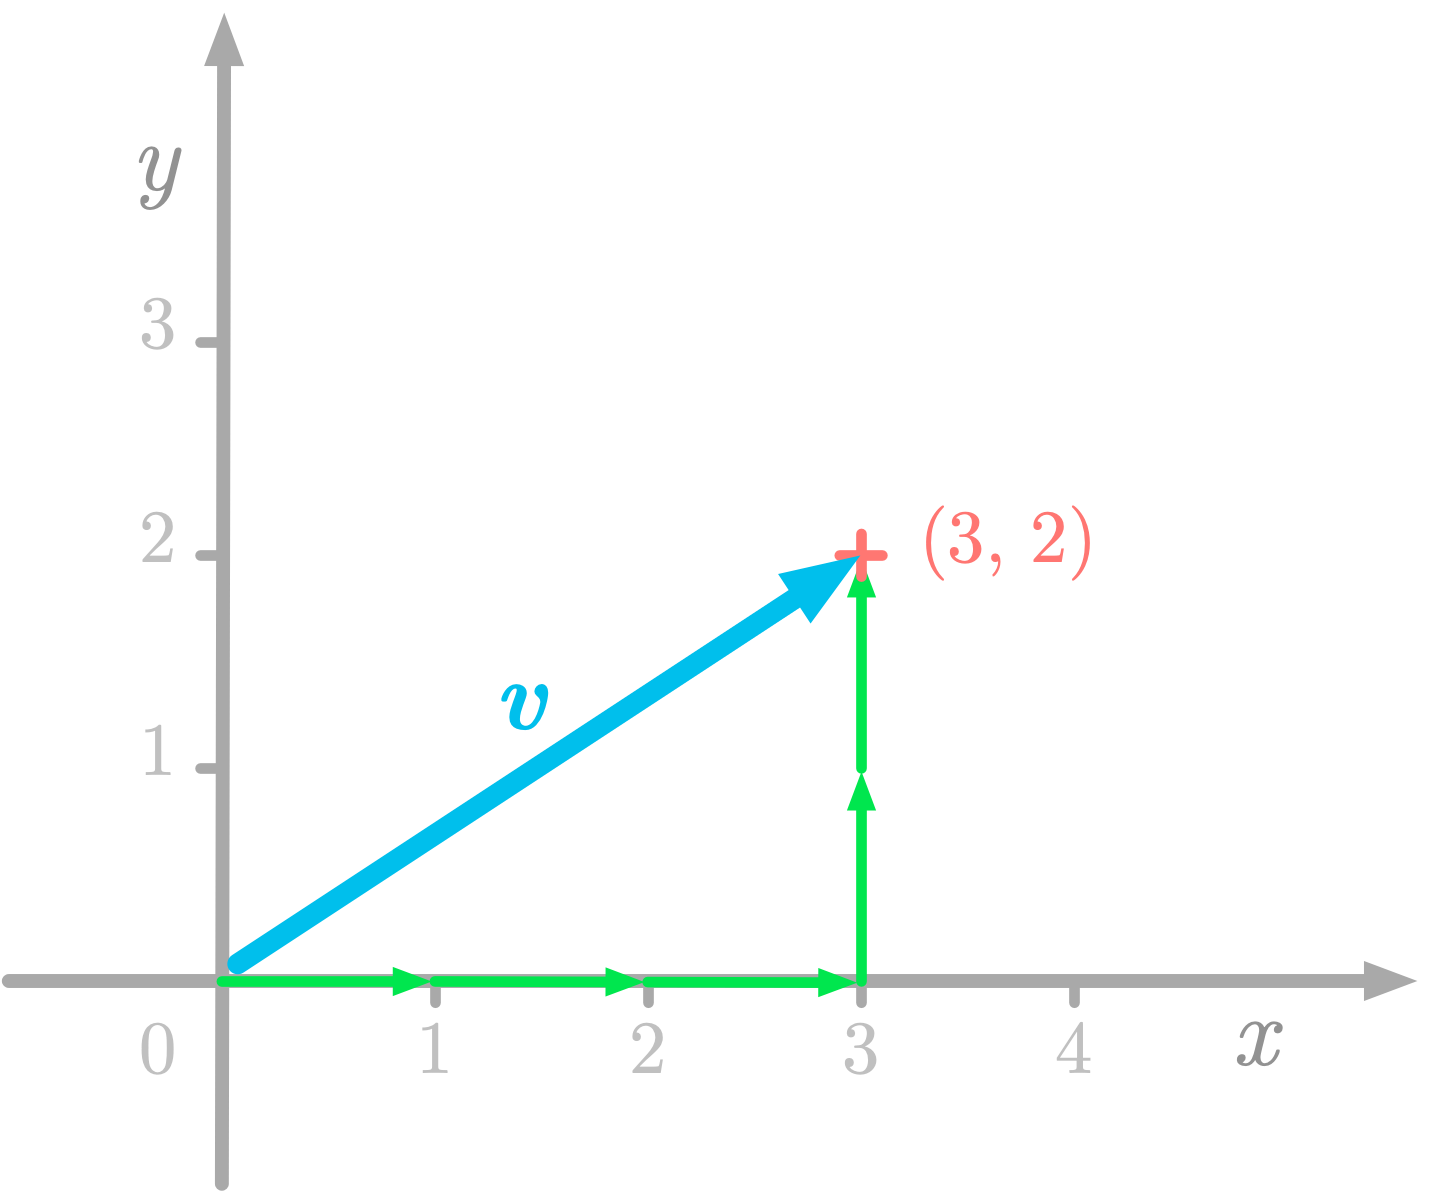 Figure 2: The vector $\vv$ has coordinates (3, 2) corresponding to three units from the origin on the $x$-axis and two on the $y$-axis.